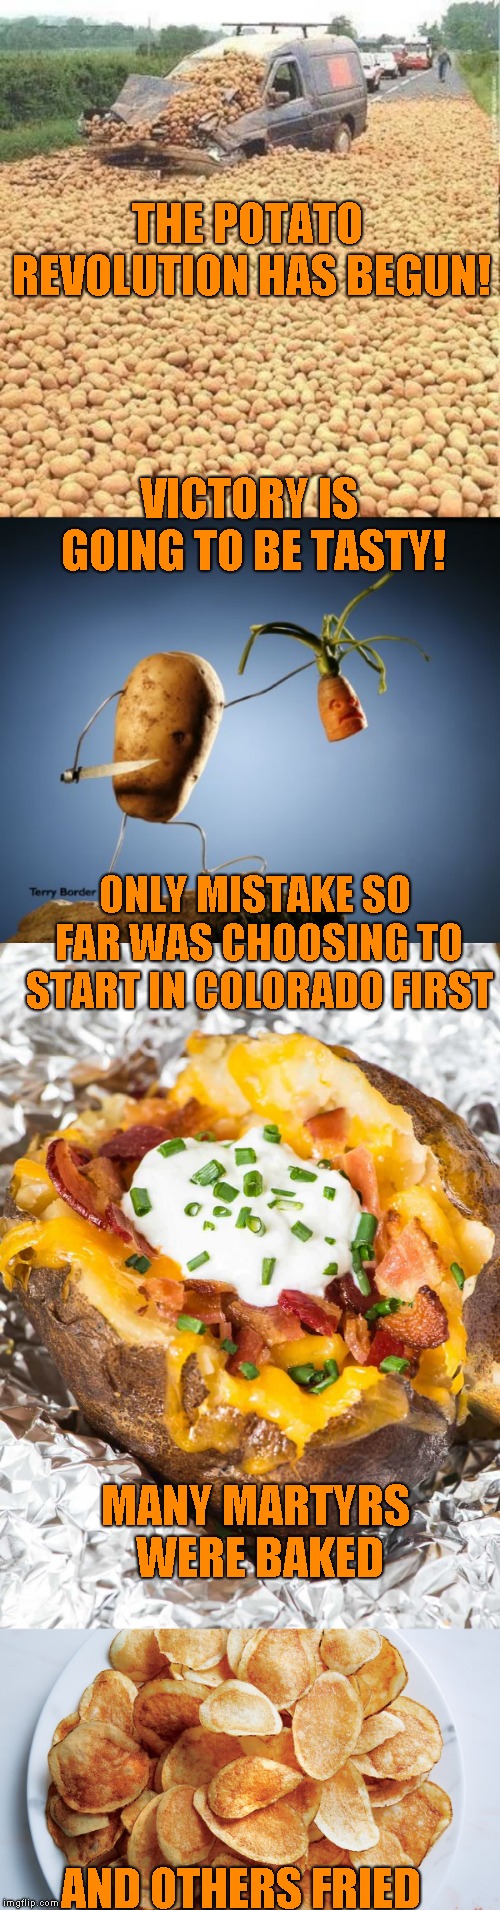 I would apologize, but I'm not going to  | THE POTATO REVOLUTION HAS BEGUN! VICTORY IS GOING TO BE TASTY! ONLY MISTAKE SO FAR WAS CHOOSING TO START IN COLORADO FIRST; MANY MARTYRS WERE BAKED; AND OTHERS FRIED | image tagged in potatoes,blatant pandering,just a joke | made w/ Imgflip meme maker